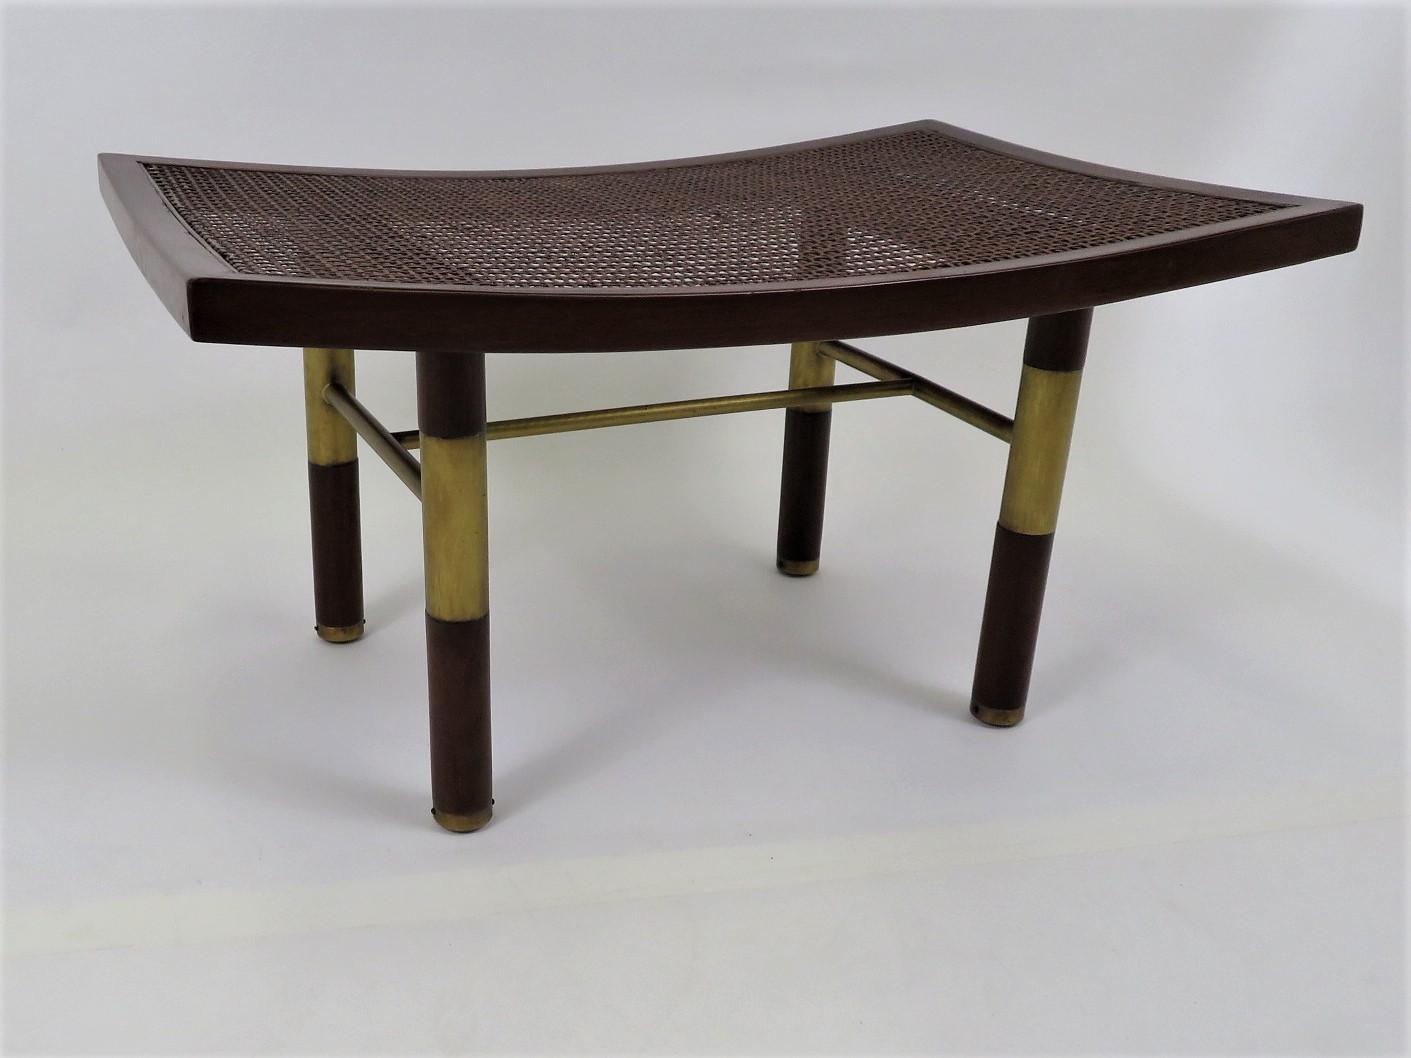 REDUCED FROM $1,750...From the 1950s and Michael Taylor, this Far East Collection Bench has a caned top and a pagoda form with turned up ends and brass stretchers and feet. Re-caned and it has been refinished. Some imperfections in the top wood by